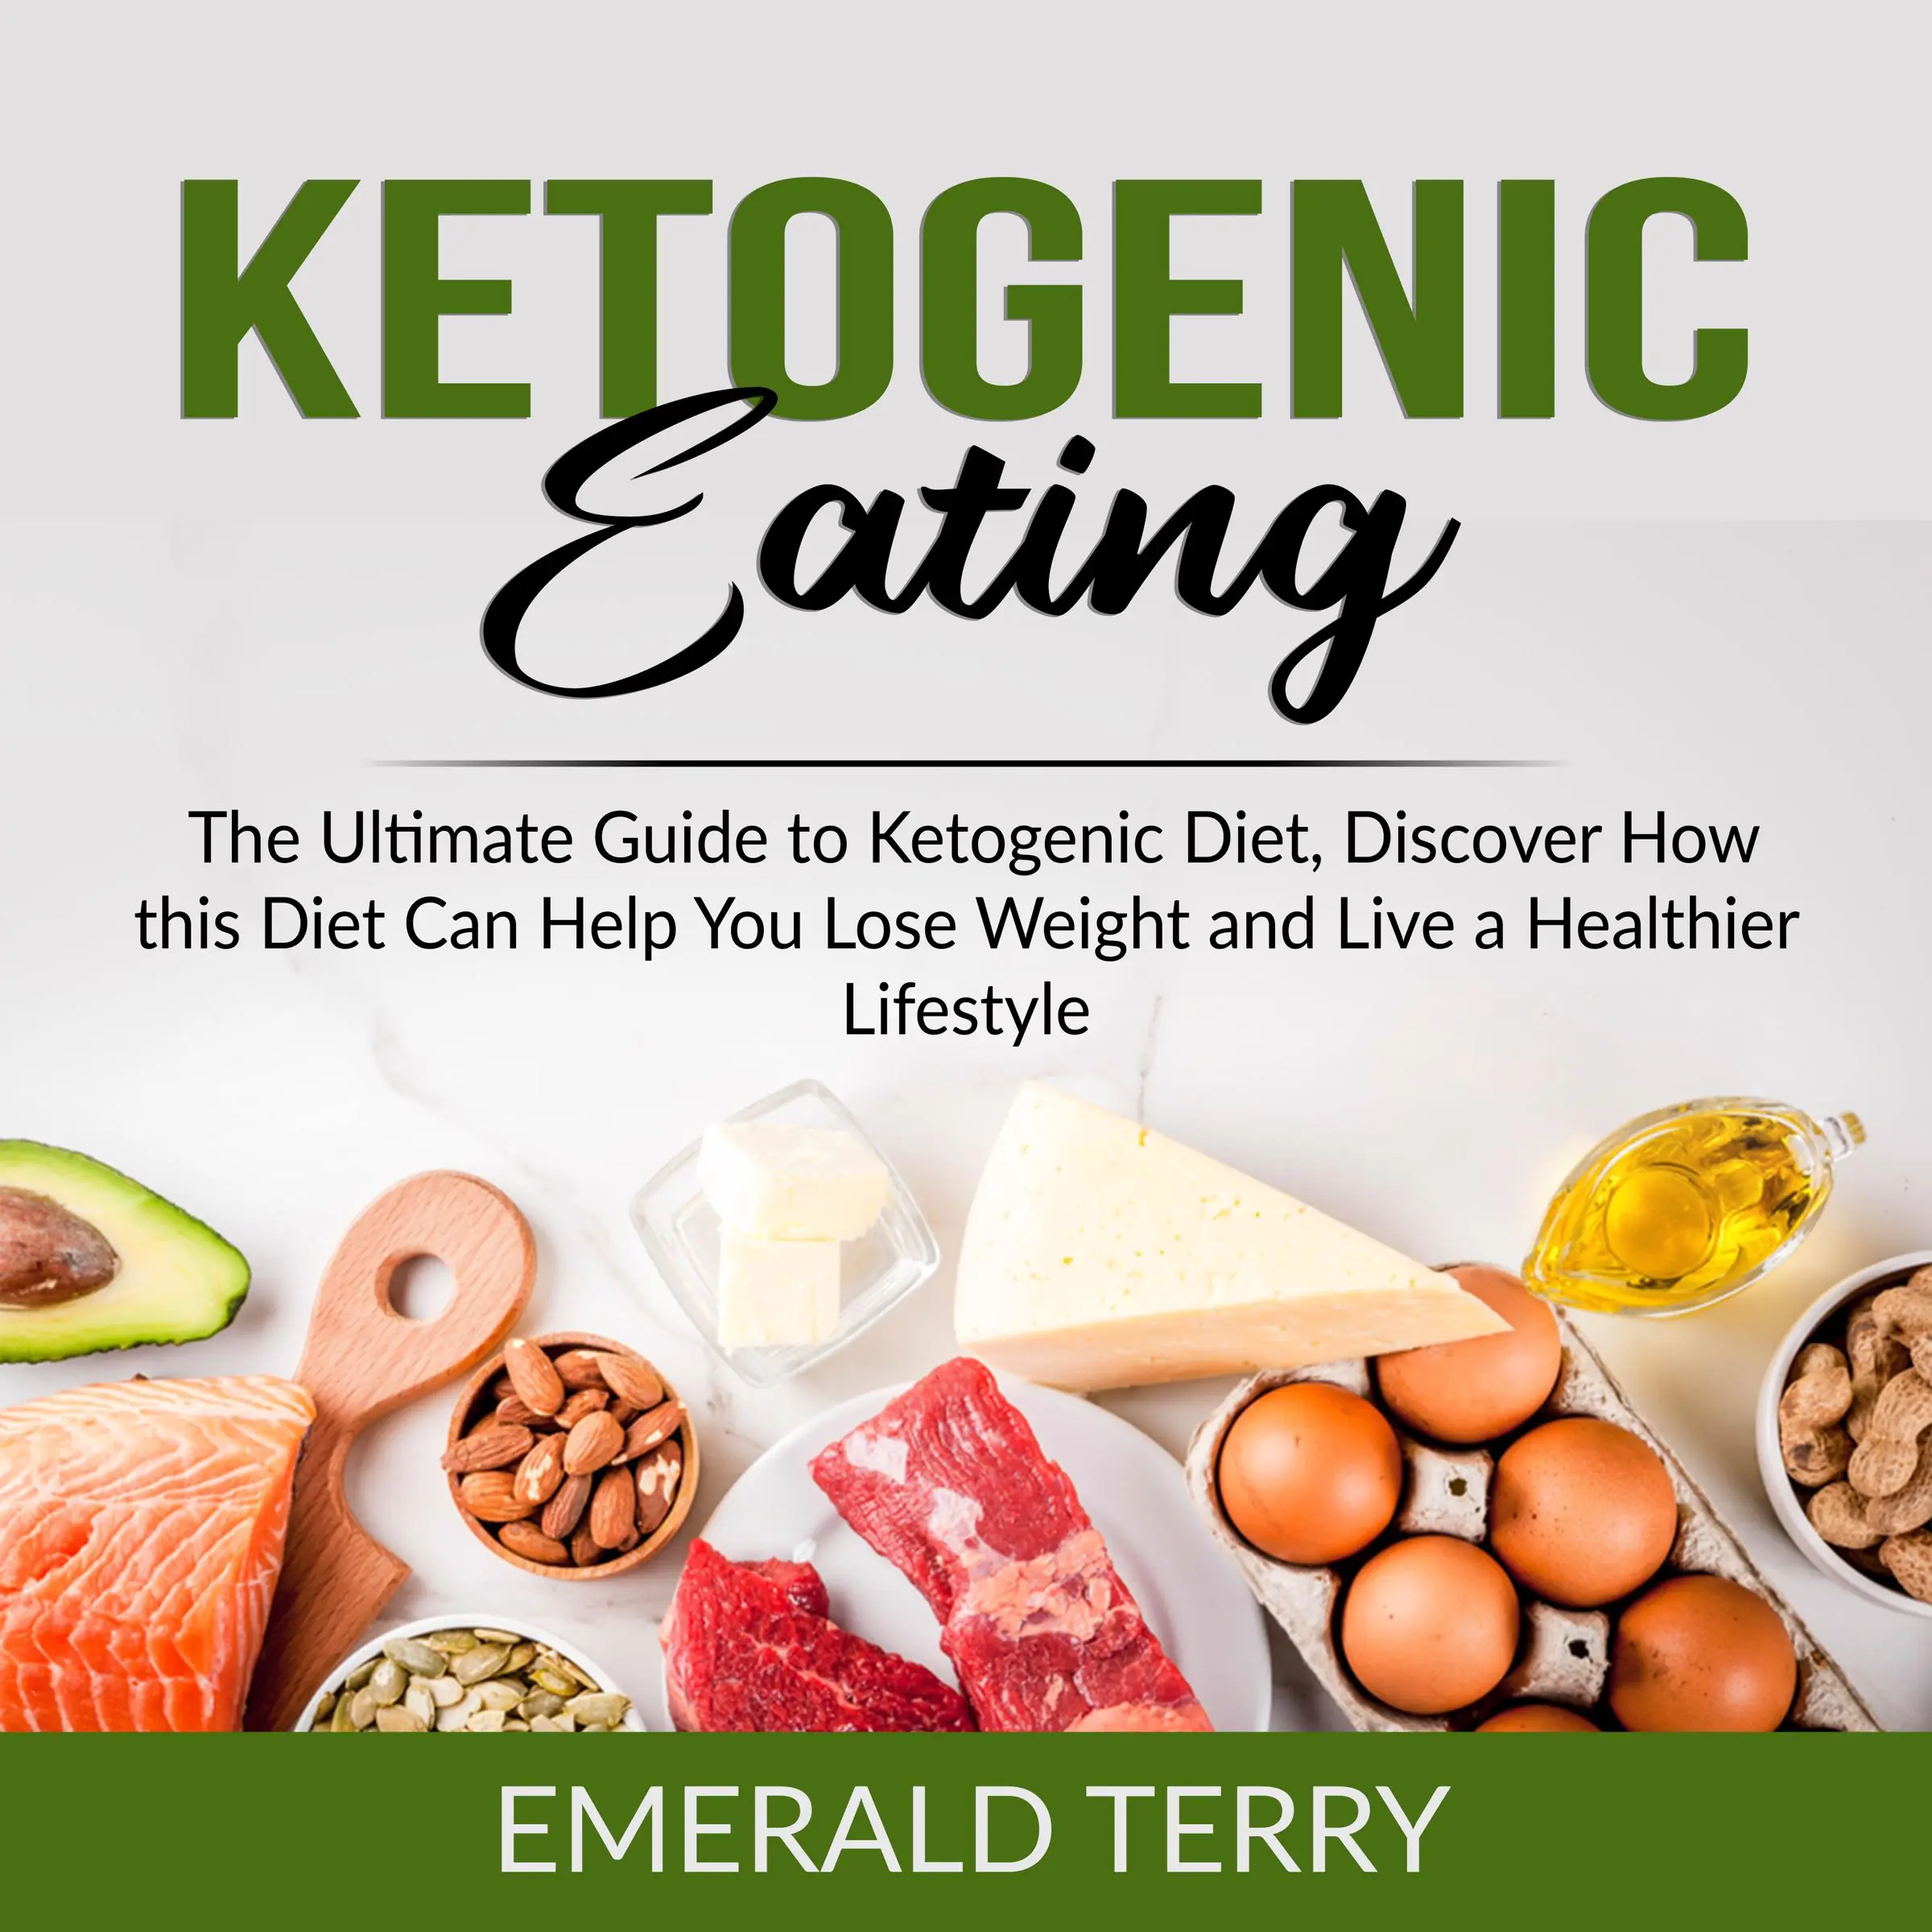 Ketogenic Eating: The Ultimate Guide to Ketogenic Diet, Discover How this Diet Can Help You Lose Weight and Live a Healthier Lifestyle Audiobook by Emerald Terry